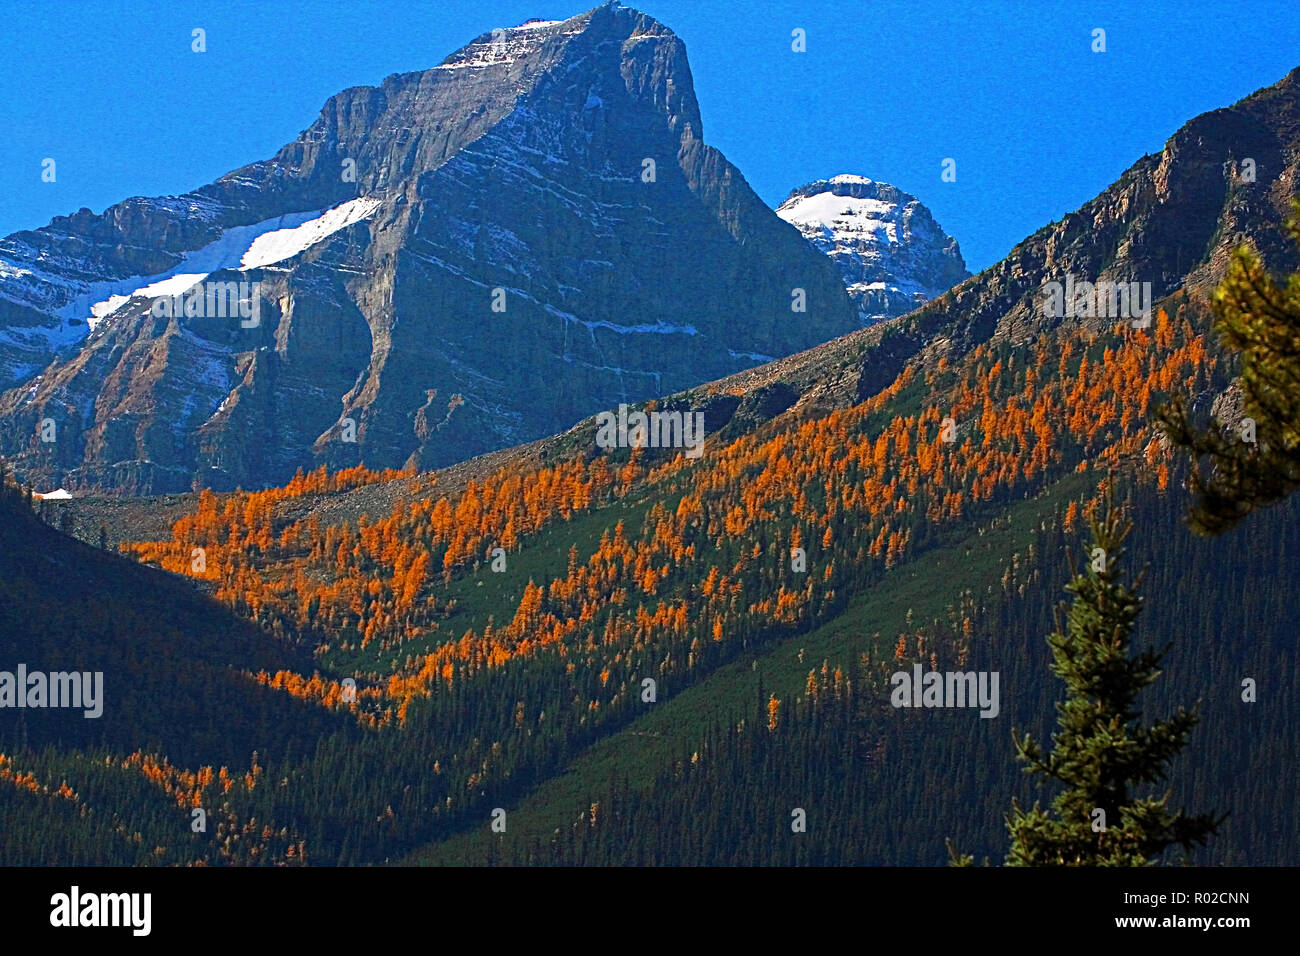 Larch trees. These needled conifers look like evergreens in spring and summer, but in the fall the needles turn golden yellow and drop to the ground. Stock Photo